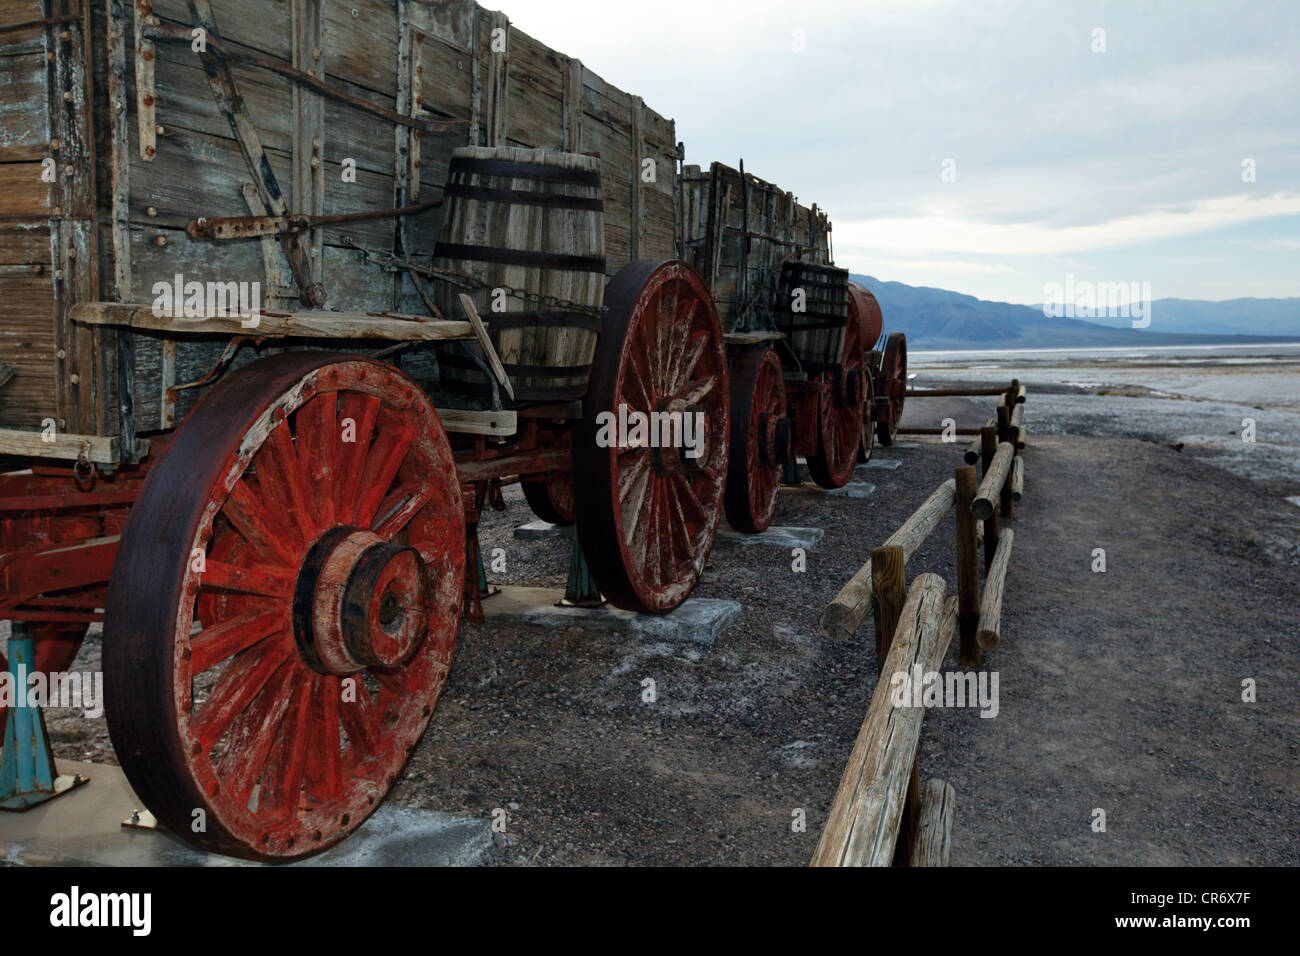 Low Angle Close Up View of a Wooden Wagons for Borax Transport, Harmony Borax Work, Detah Valley, California Stock Photo